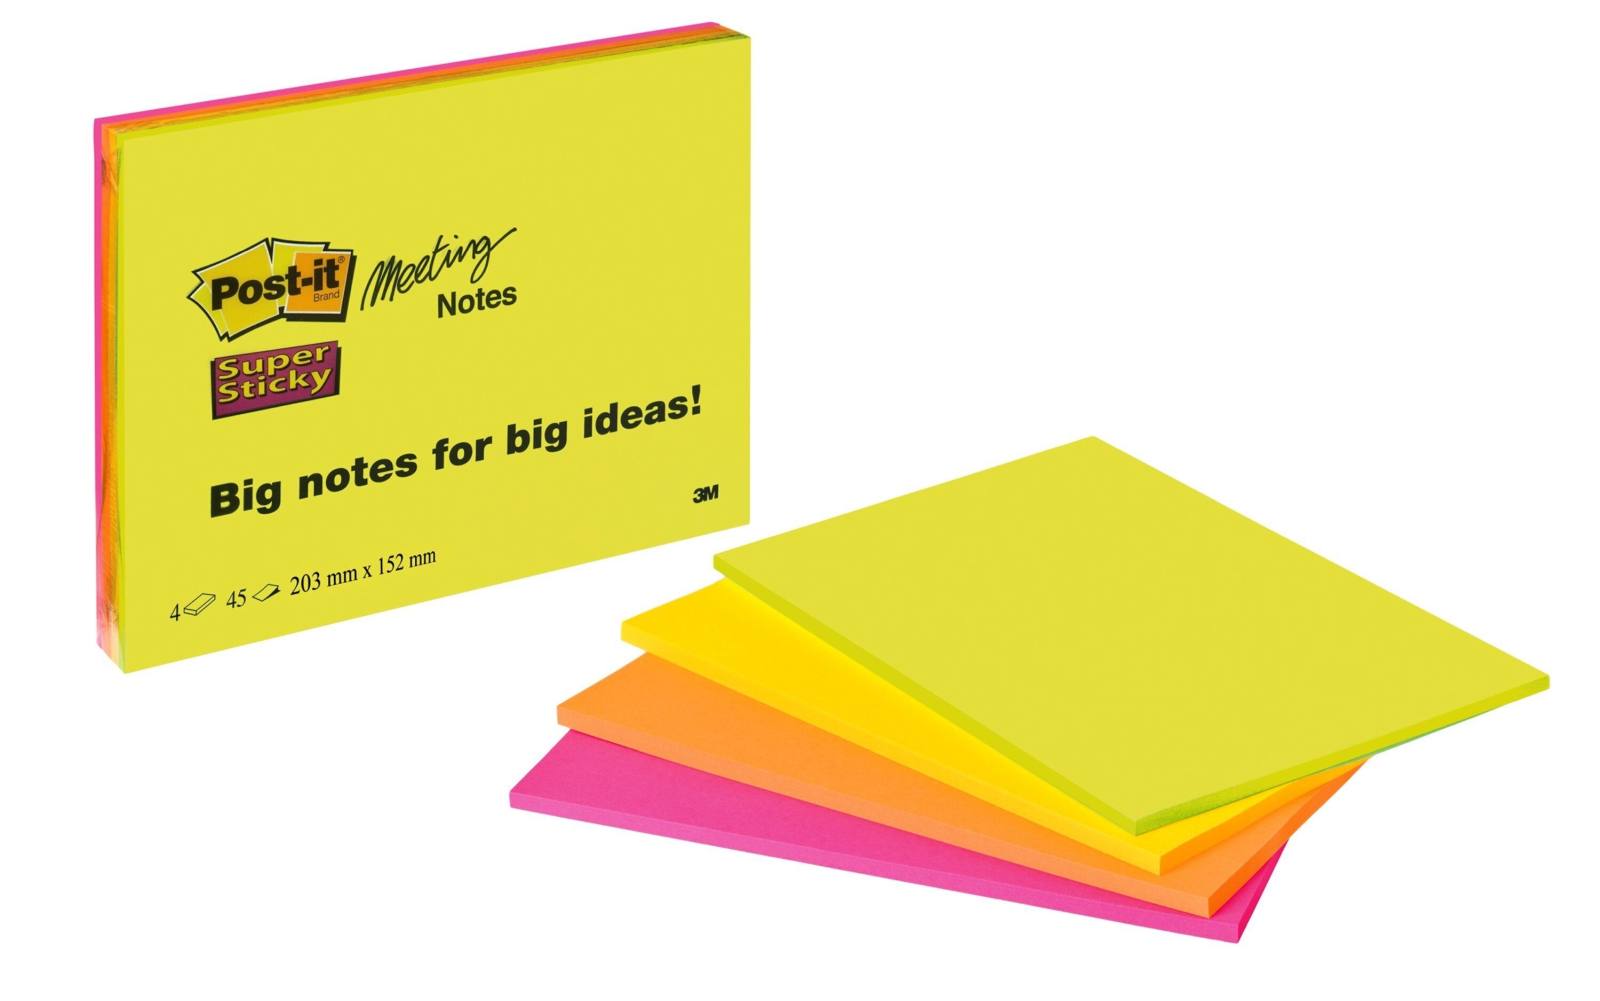 3M Post-it Super Sticky Meeting Notes 6845-SSP, 203 mm x 152 mm, neon green, neon orange, ultra yellow, ultra pink, 4 pads of 45 sheets each